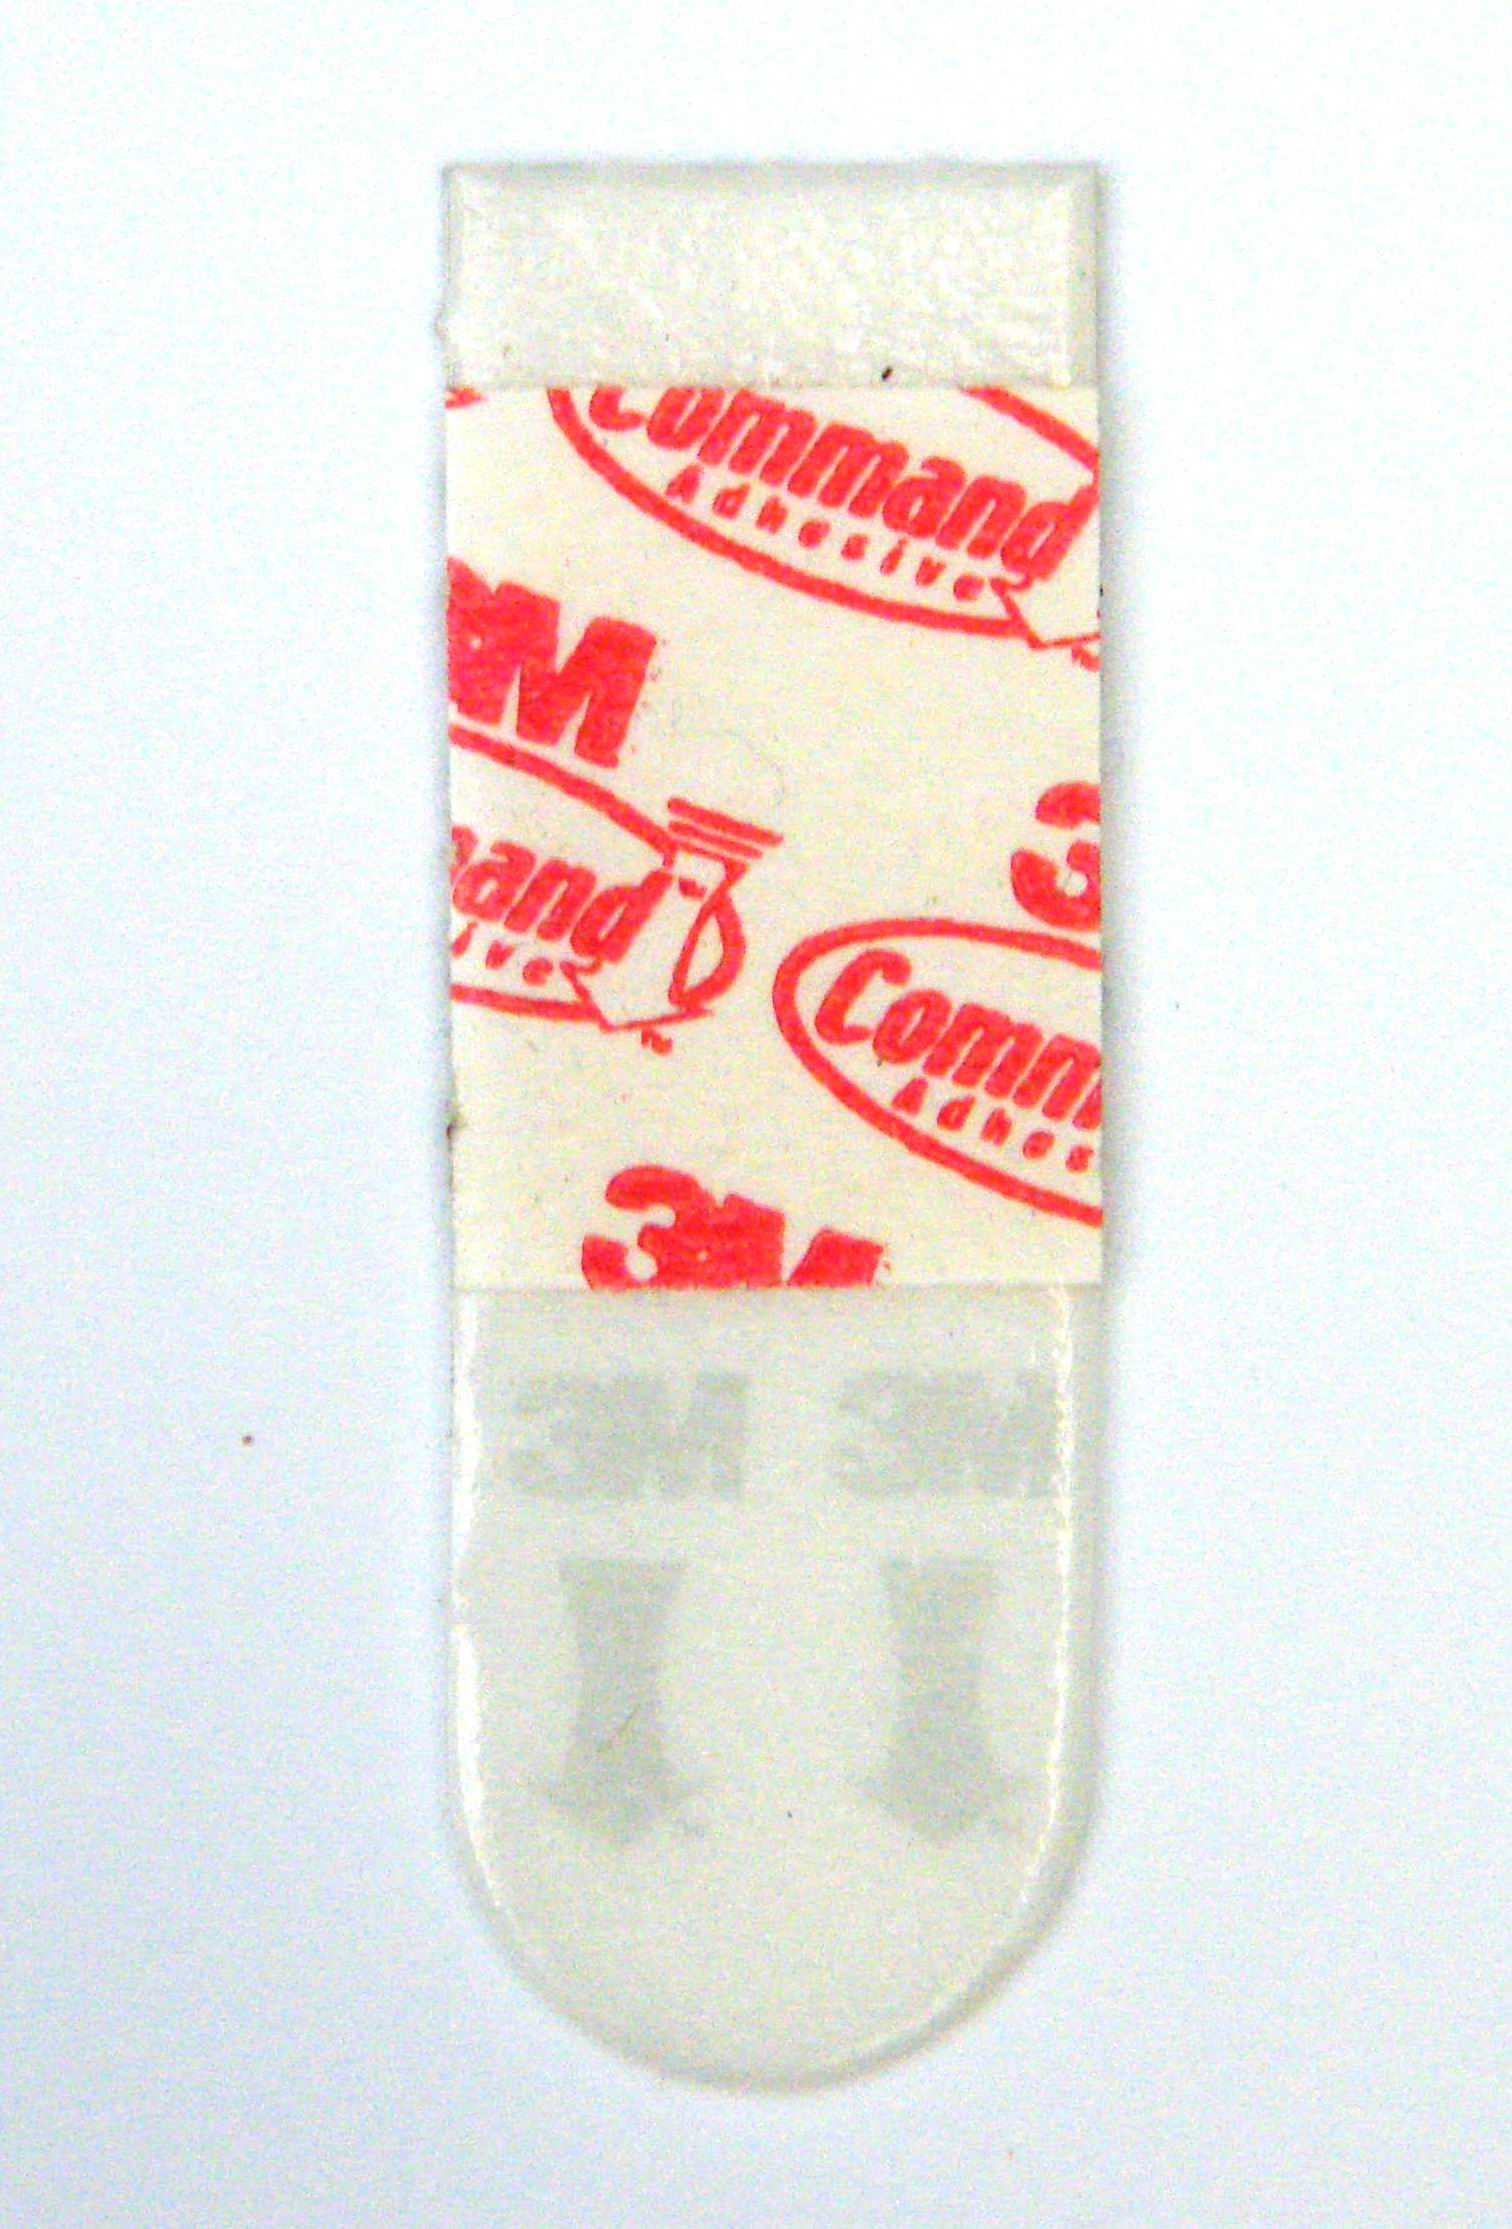 Command™ Small Refill Strips